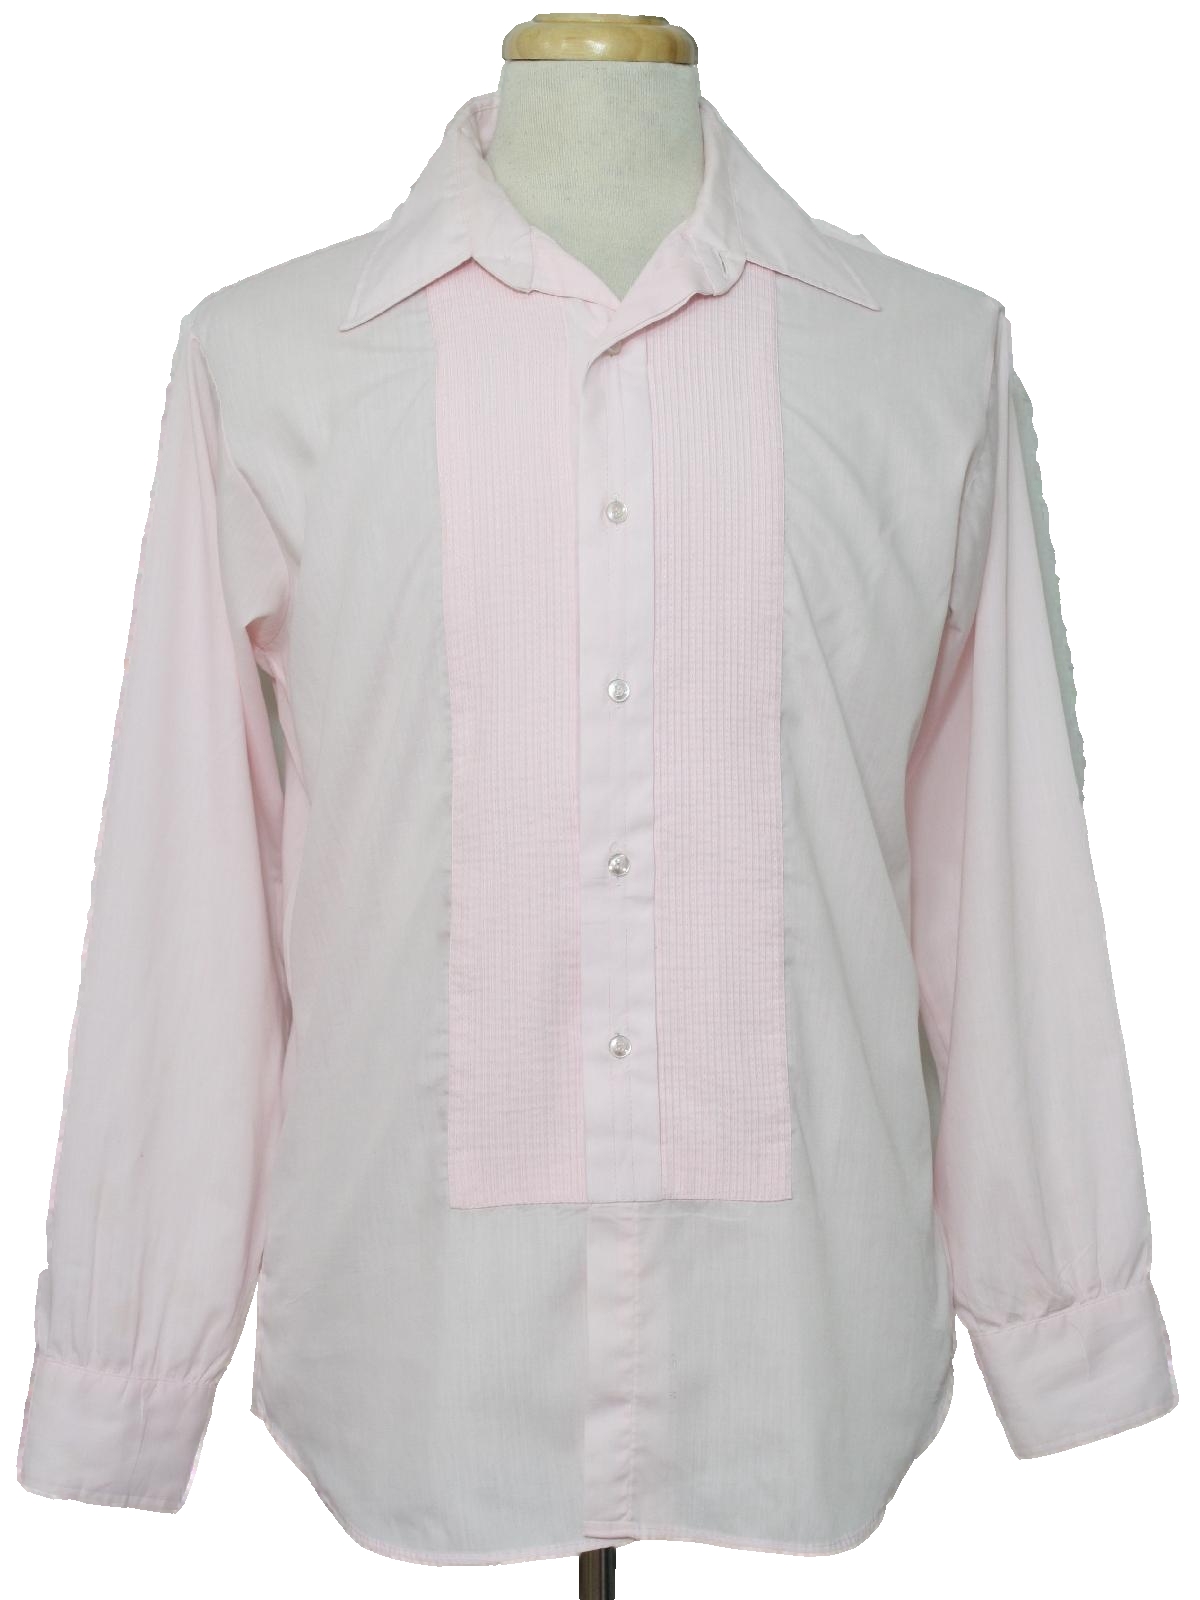 Eighties Vintage Shirt: 80s -L and M Fashions- Mens light pink ...